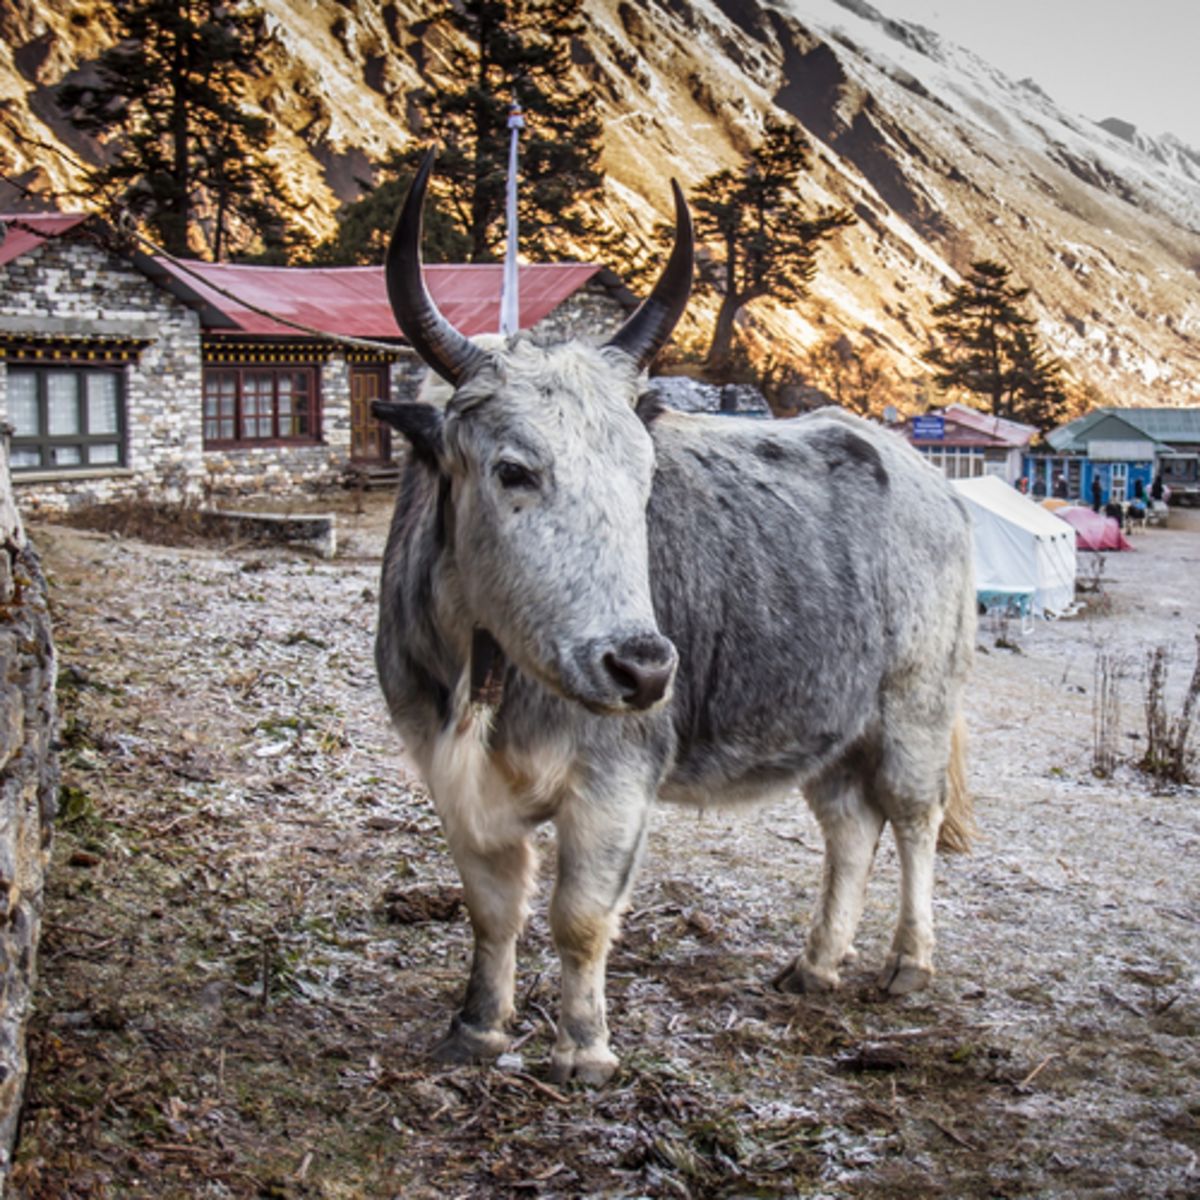 What animals will I see on the Everest Base Camp trek?